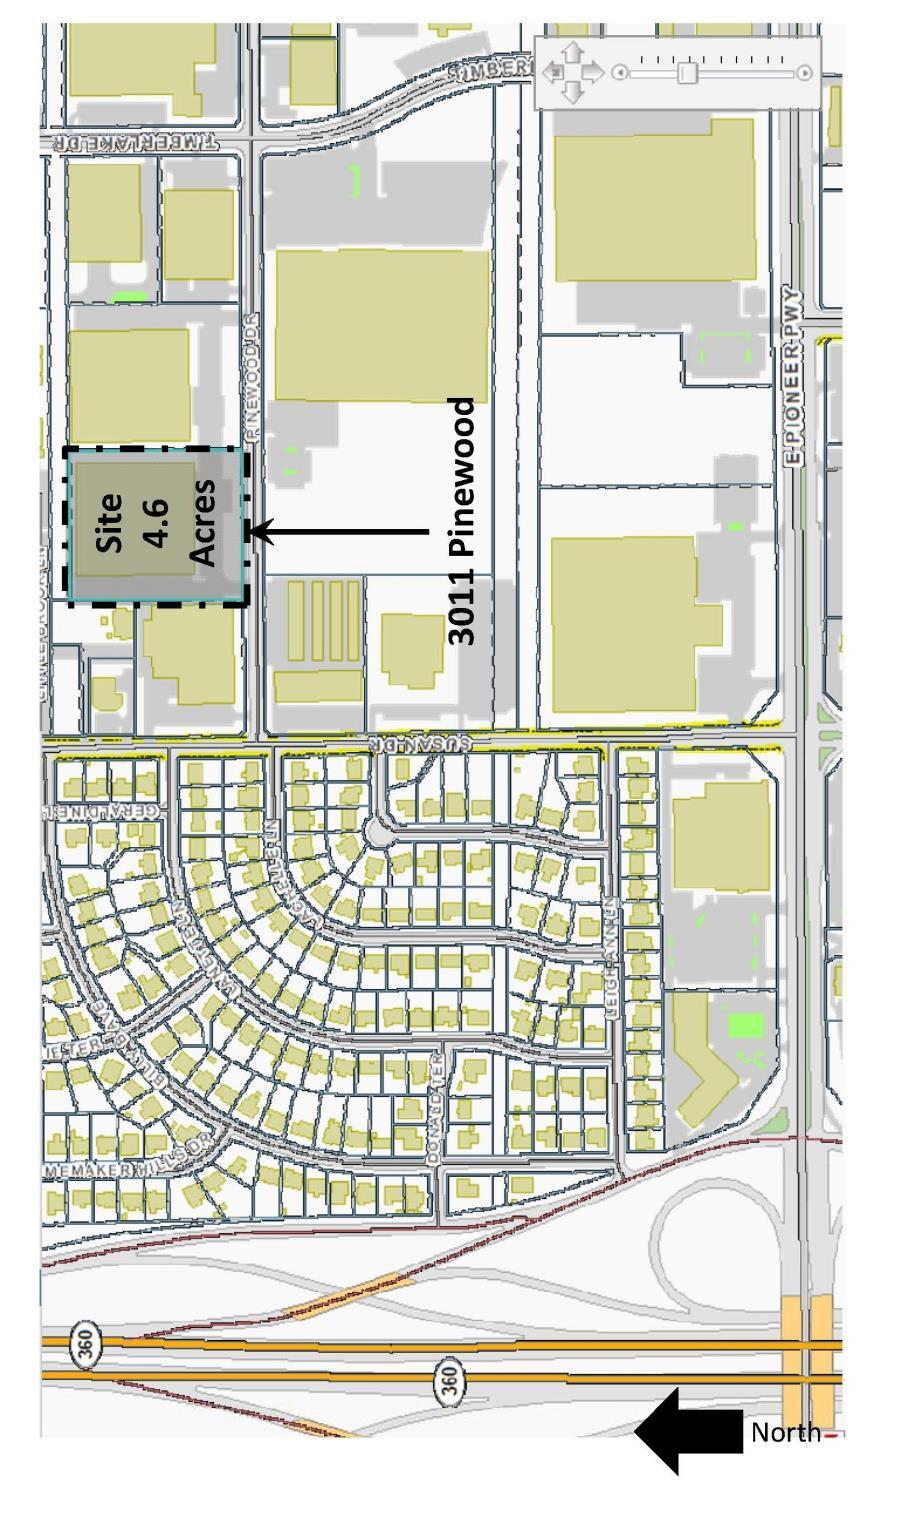 Exhibit B PROPERTY DESCRIPTION The west ½ of Site 68, Great Southwest South, Great Southwest Industrial district, an addition to the